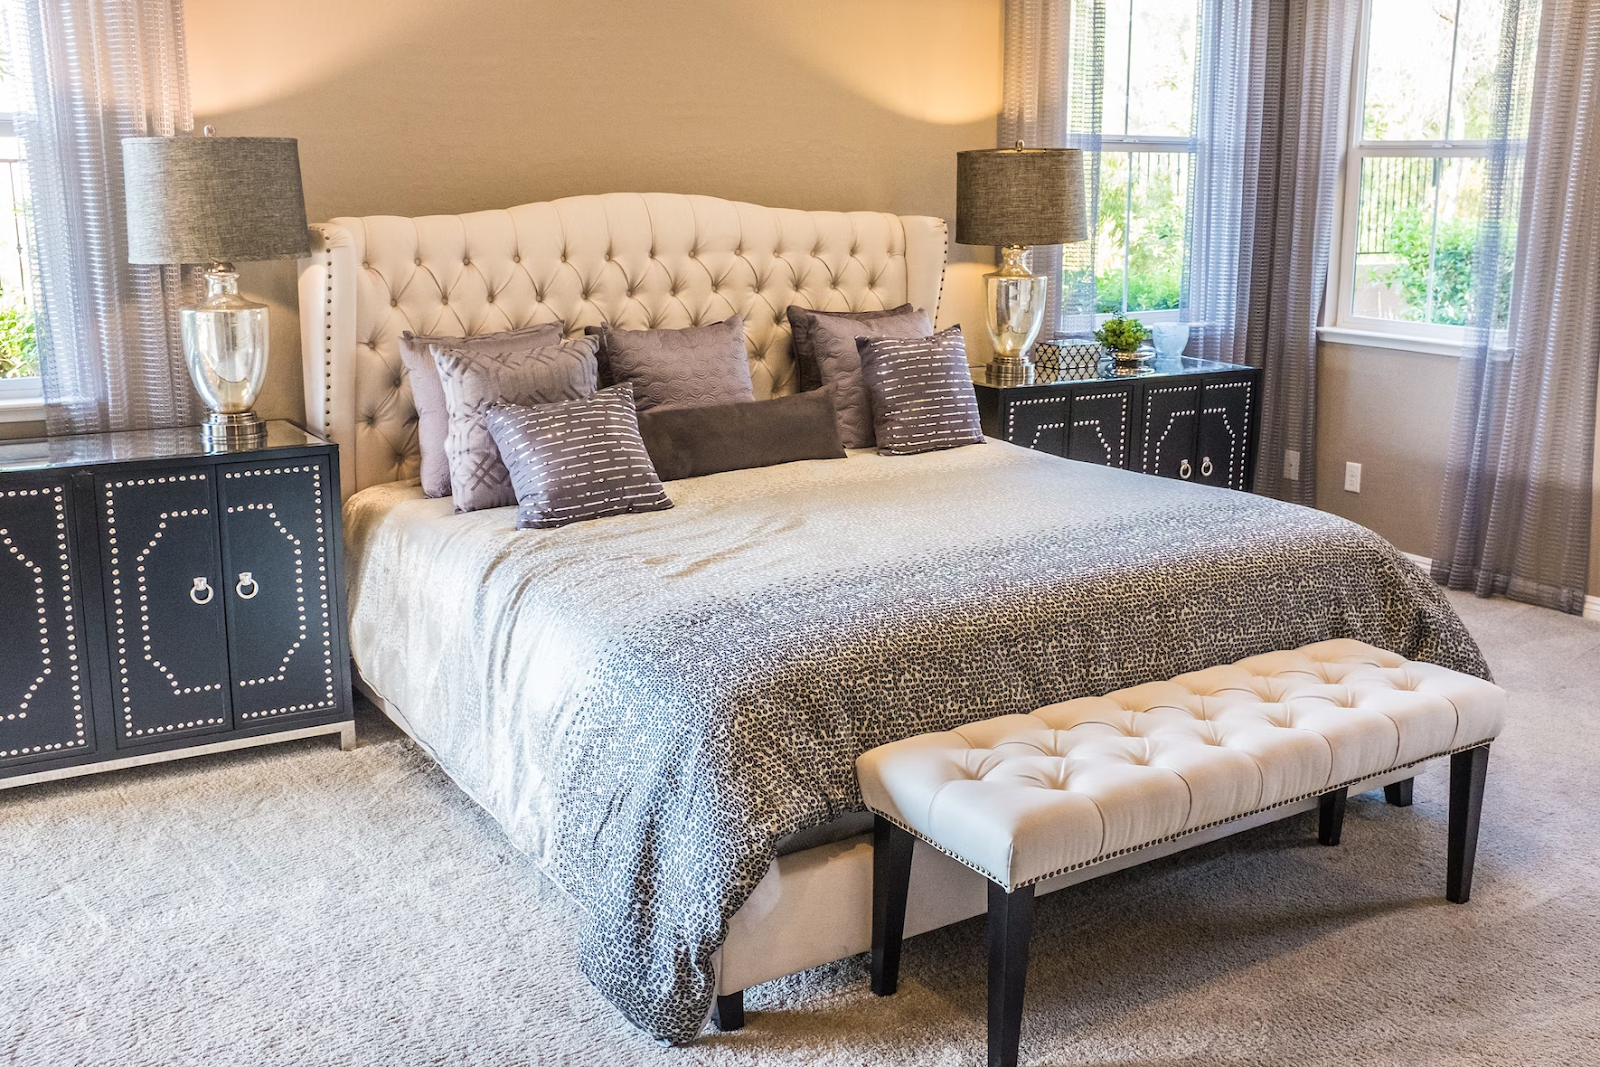 king sized divan bed with cream headboard, silver bed linens and purple scatter cushions in a modern decorated bedroom with black side tables and silver lamps